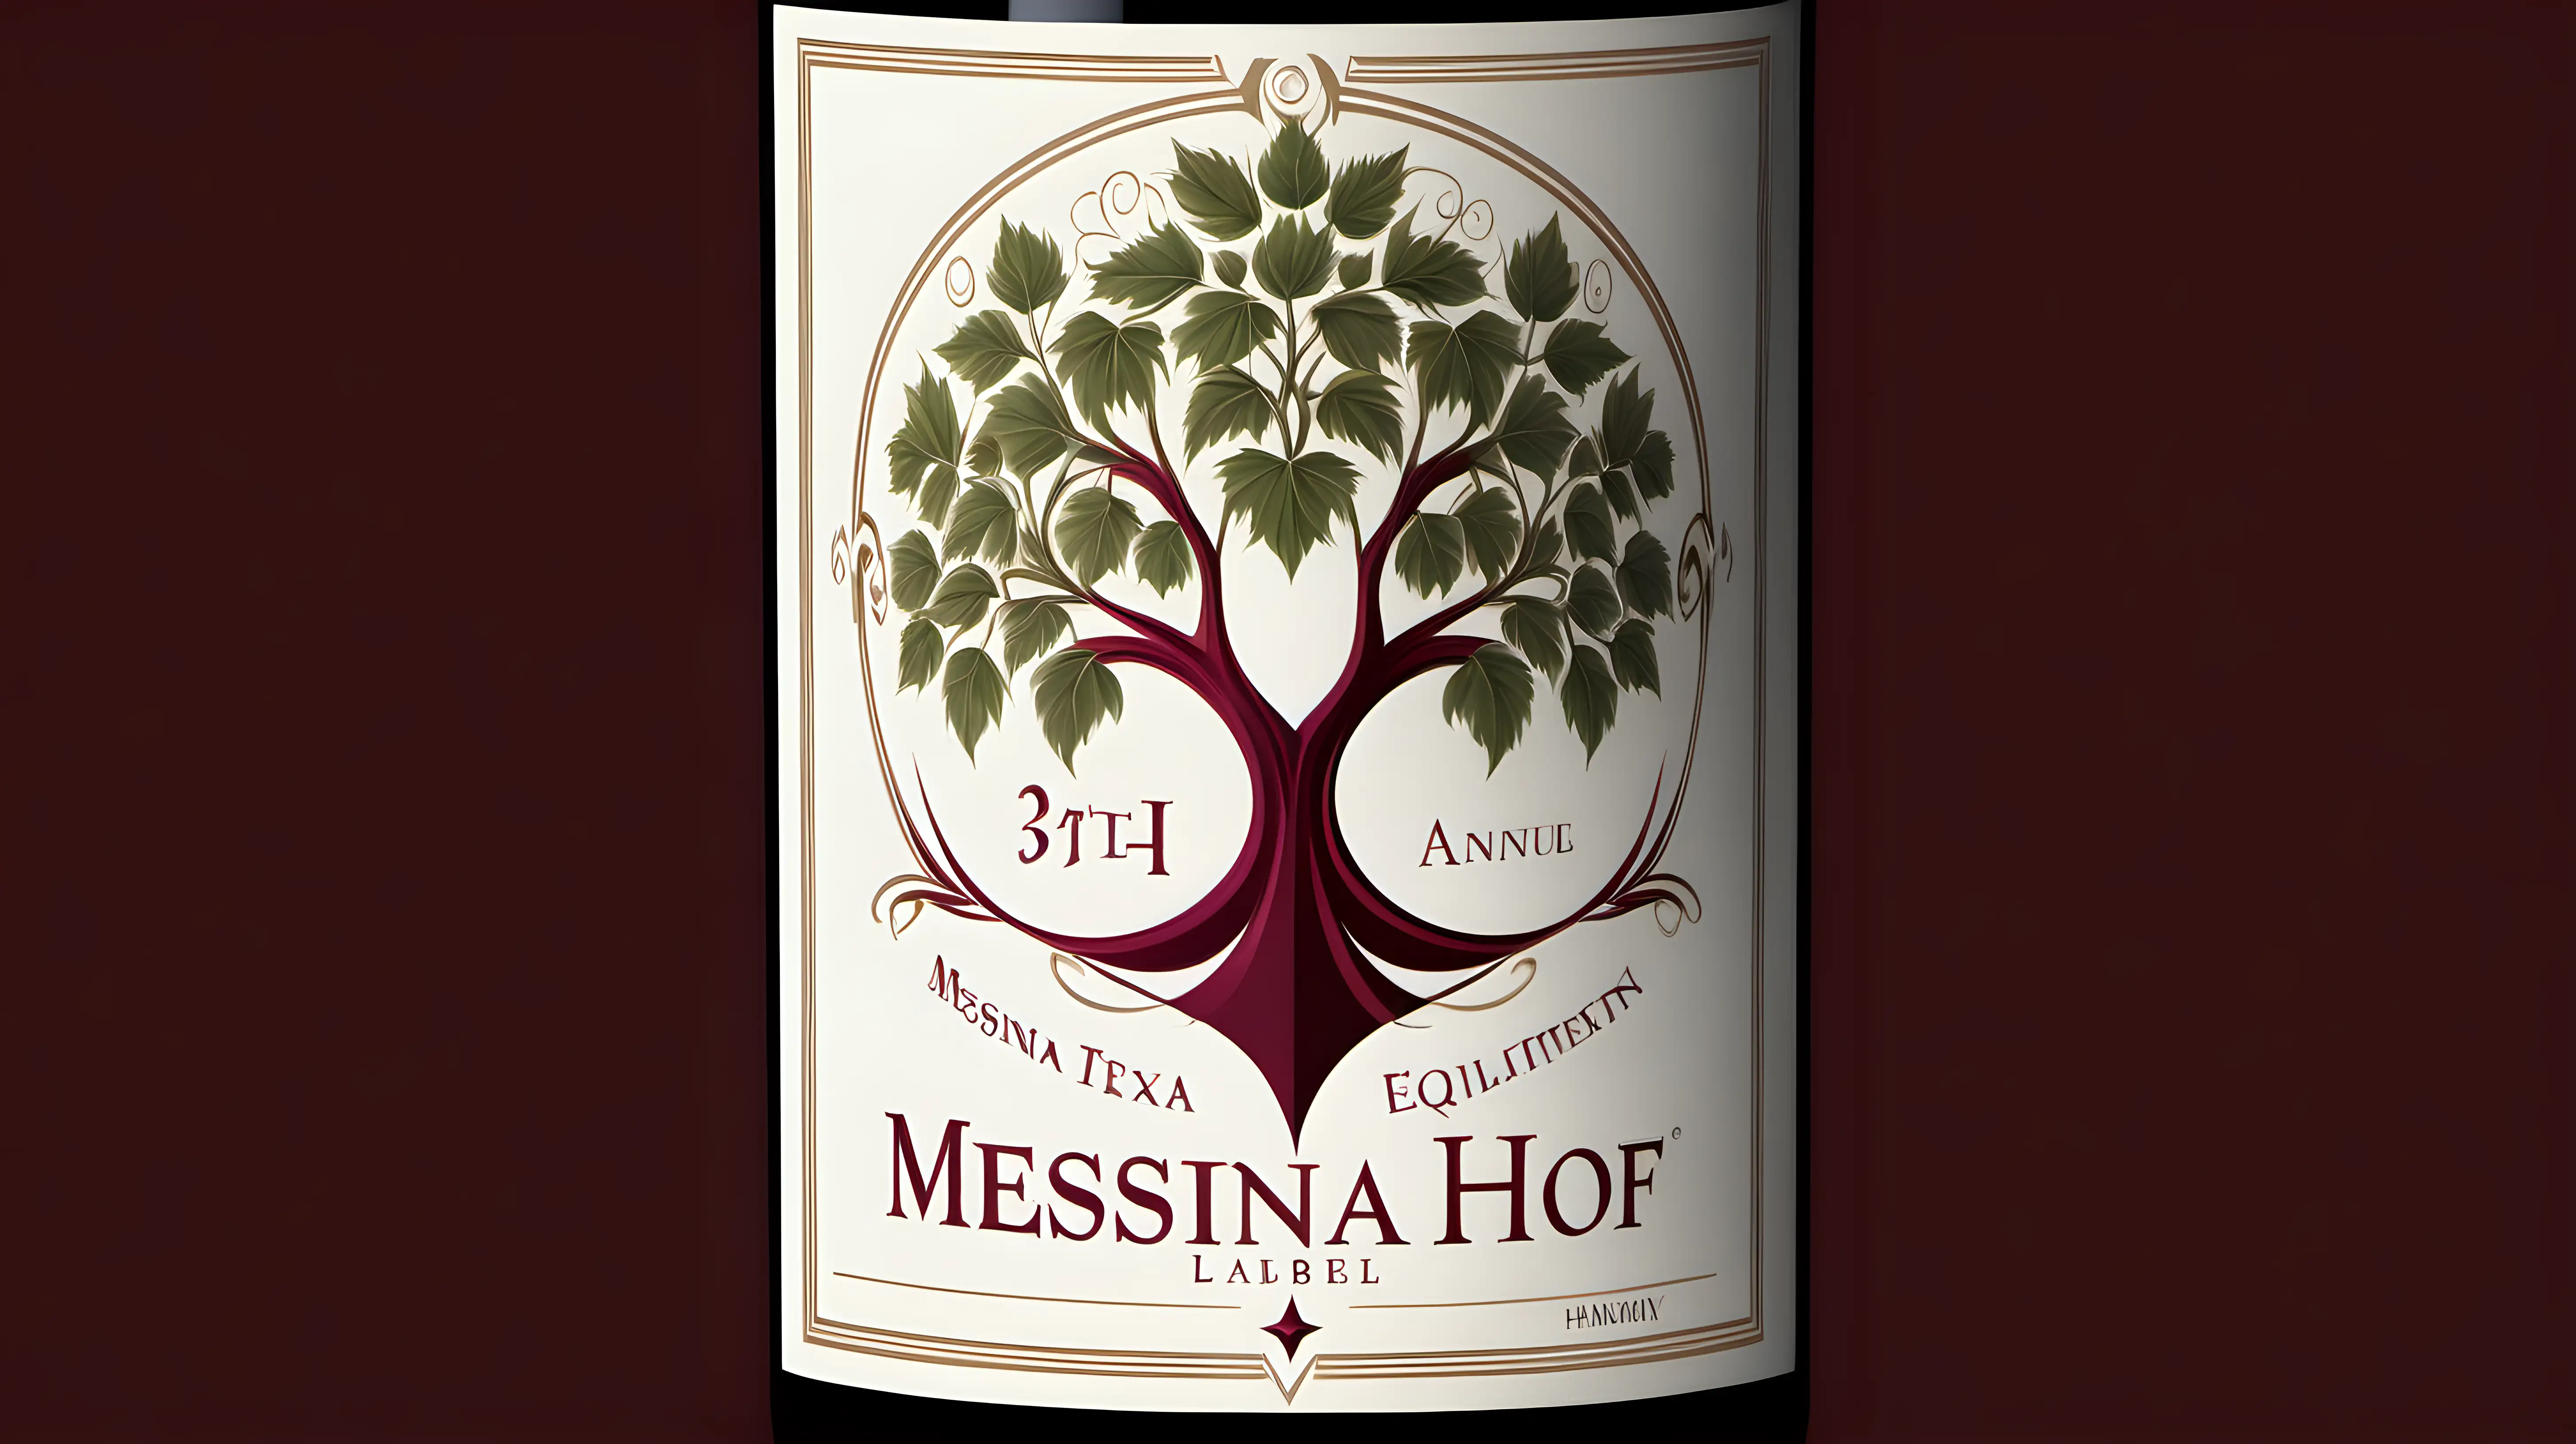 Create an image for  a wine bottle label representing The 34th Annual Messina Hof Texas Artist Wine Label Competition ,the theme of "SYMMETRY." creativity: balance, equilibrium, and harmony. 
